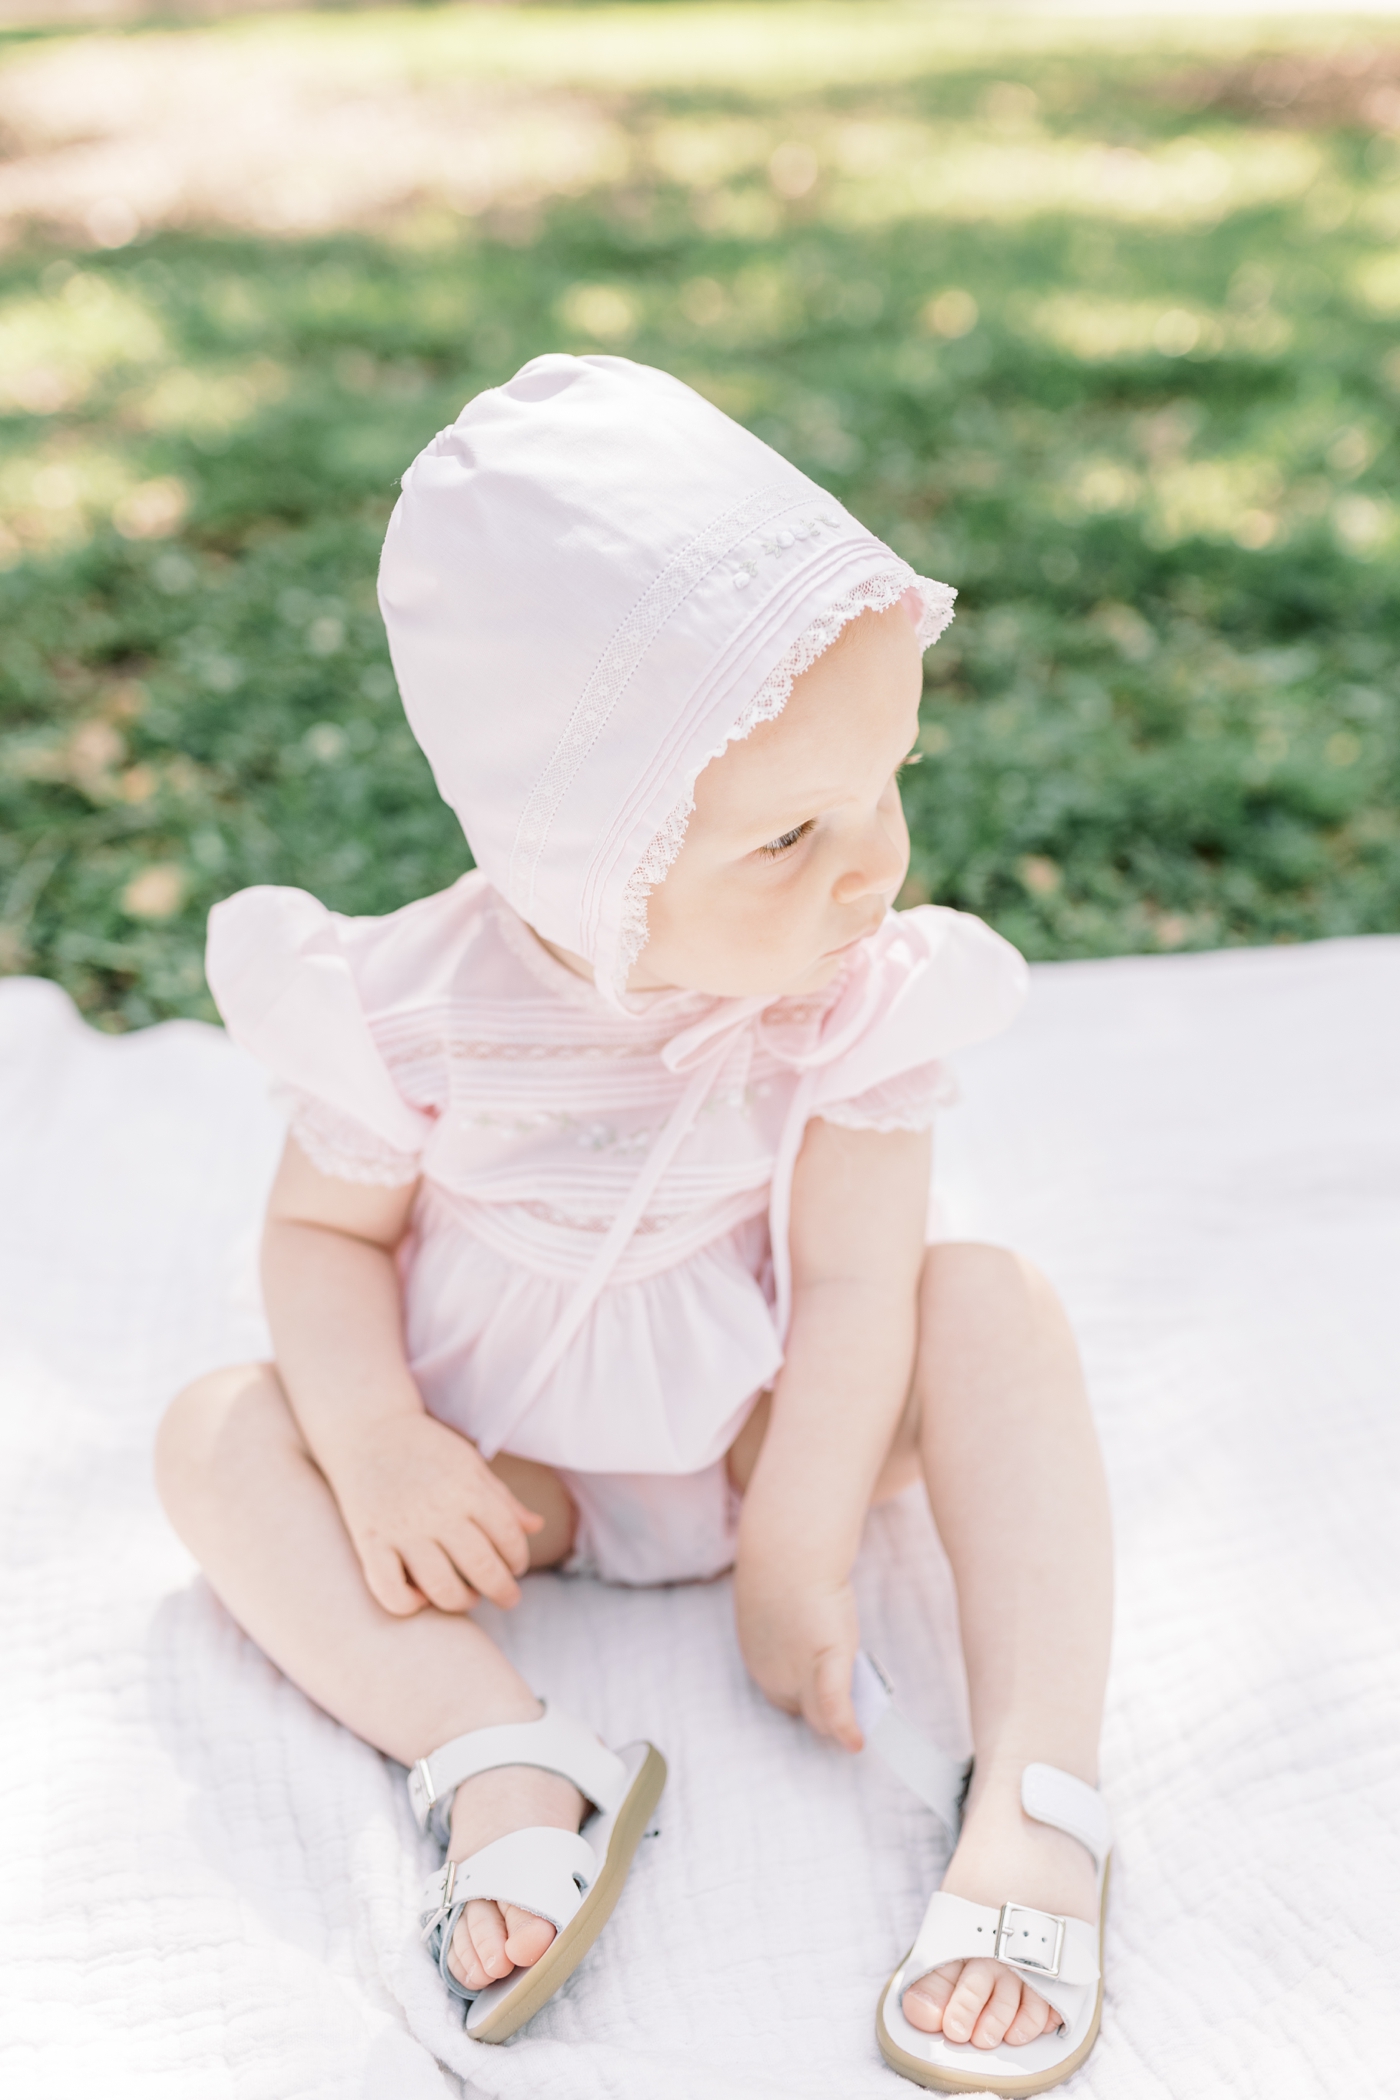 Baby girl in pink bonnet | Photo by Caitlyn Motycka Photography.